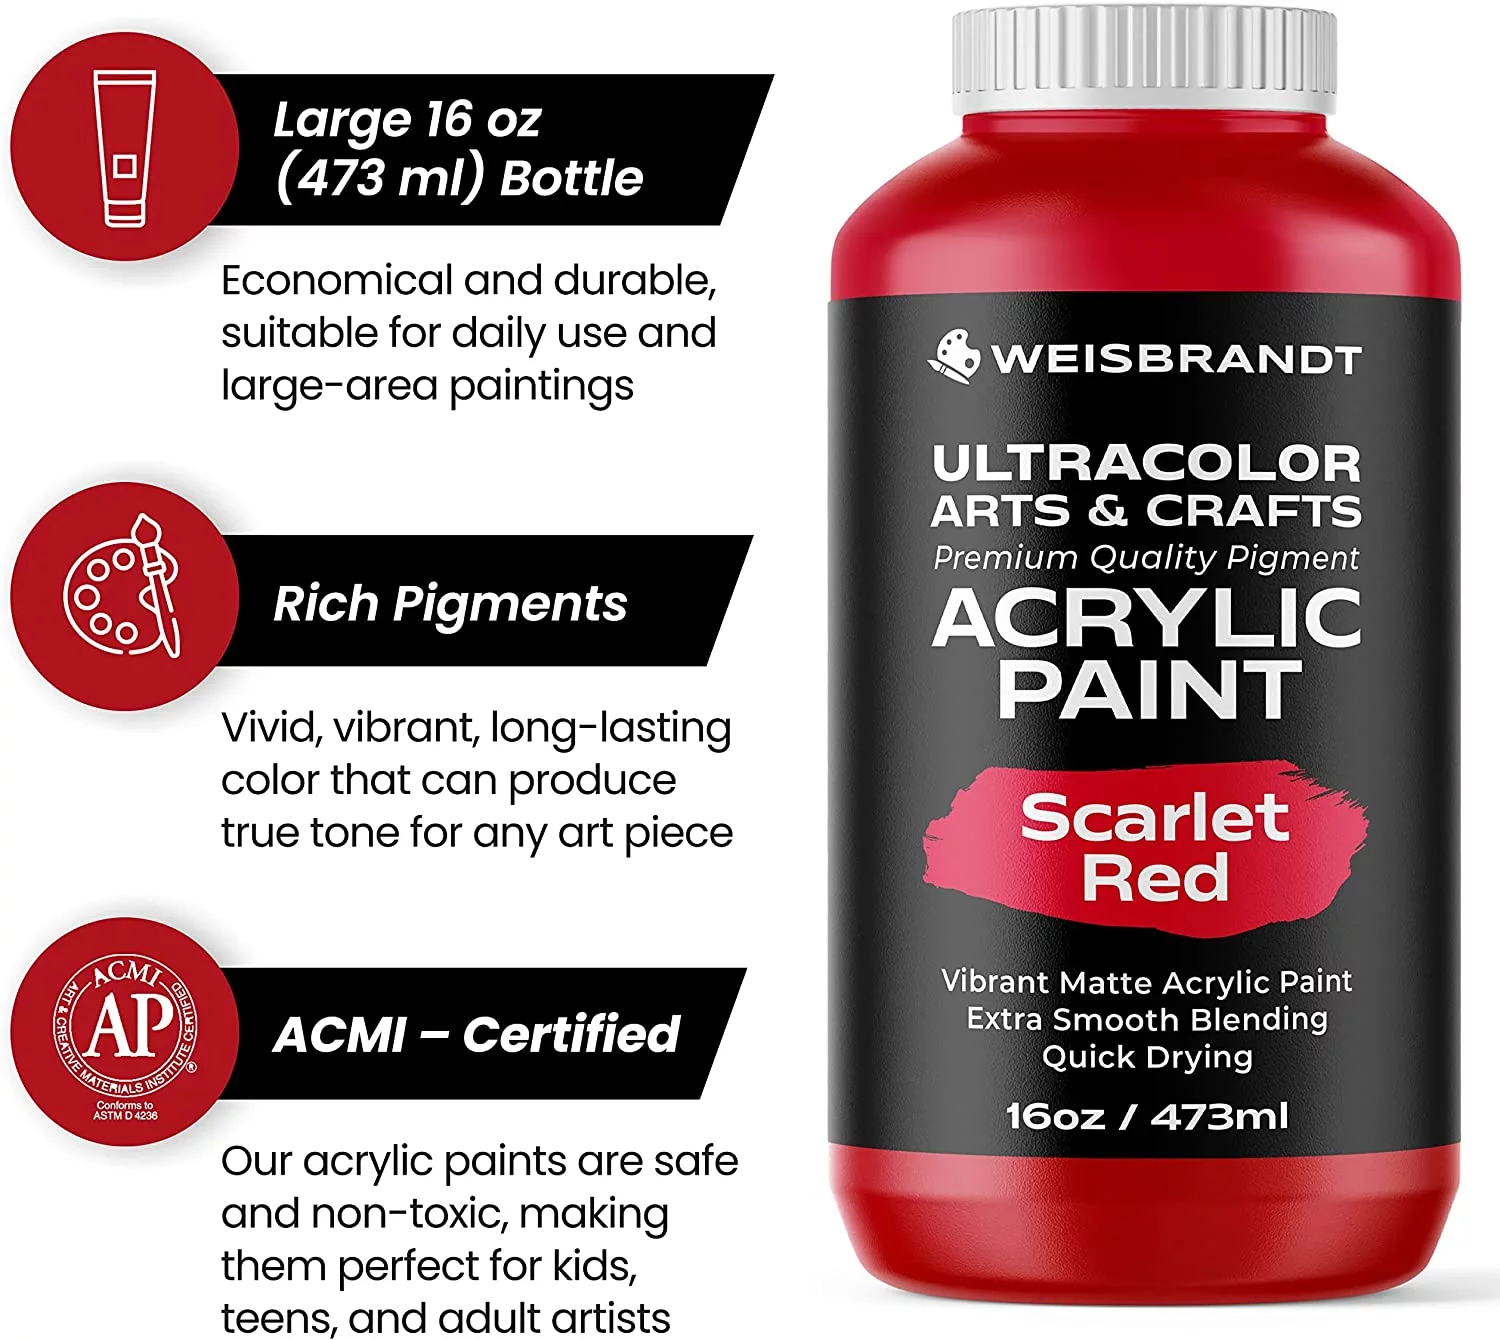 Acrylic Paint Scarlet Red 